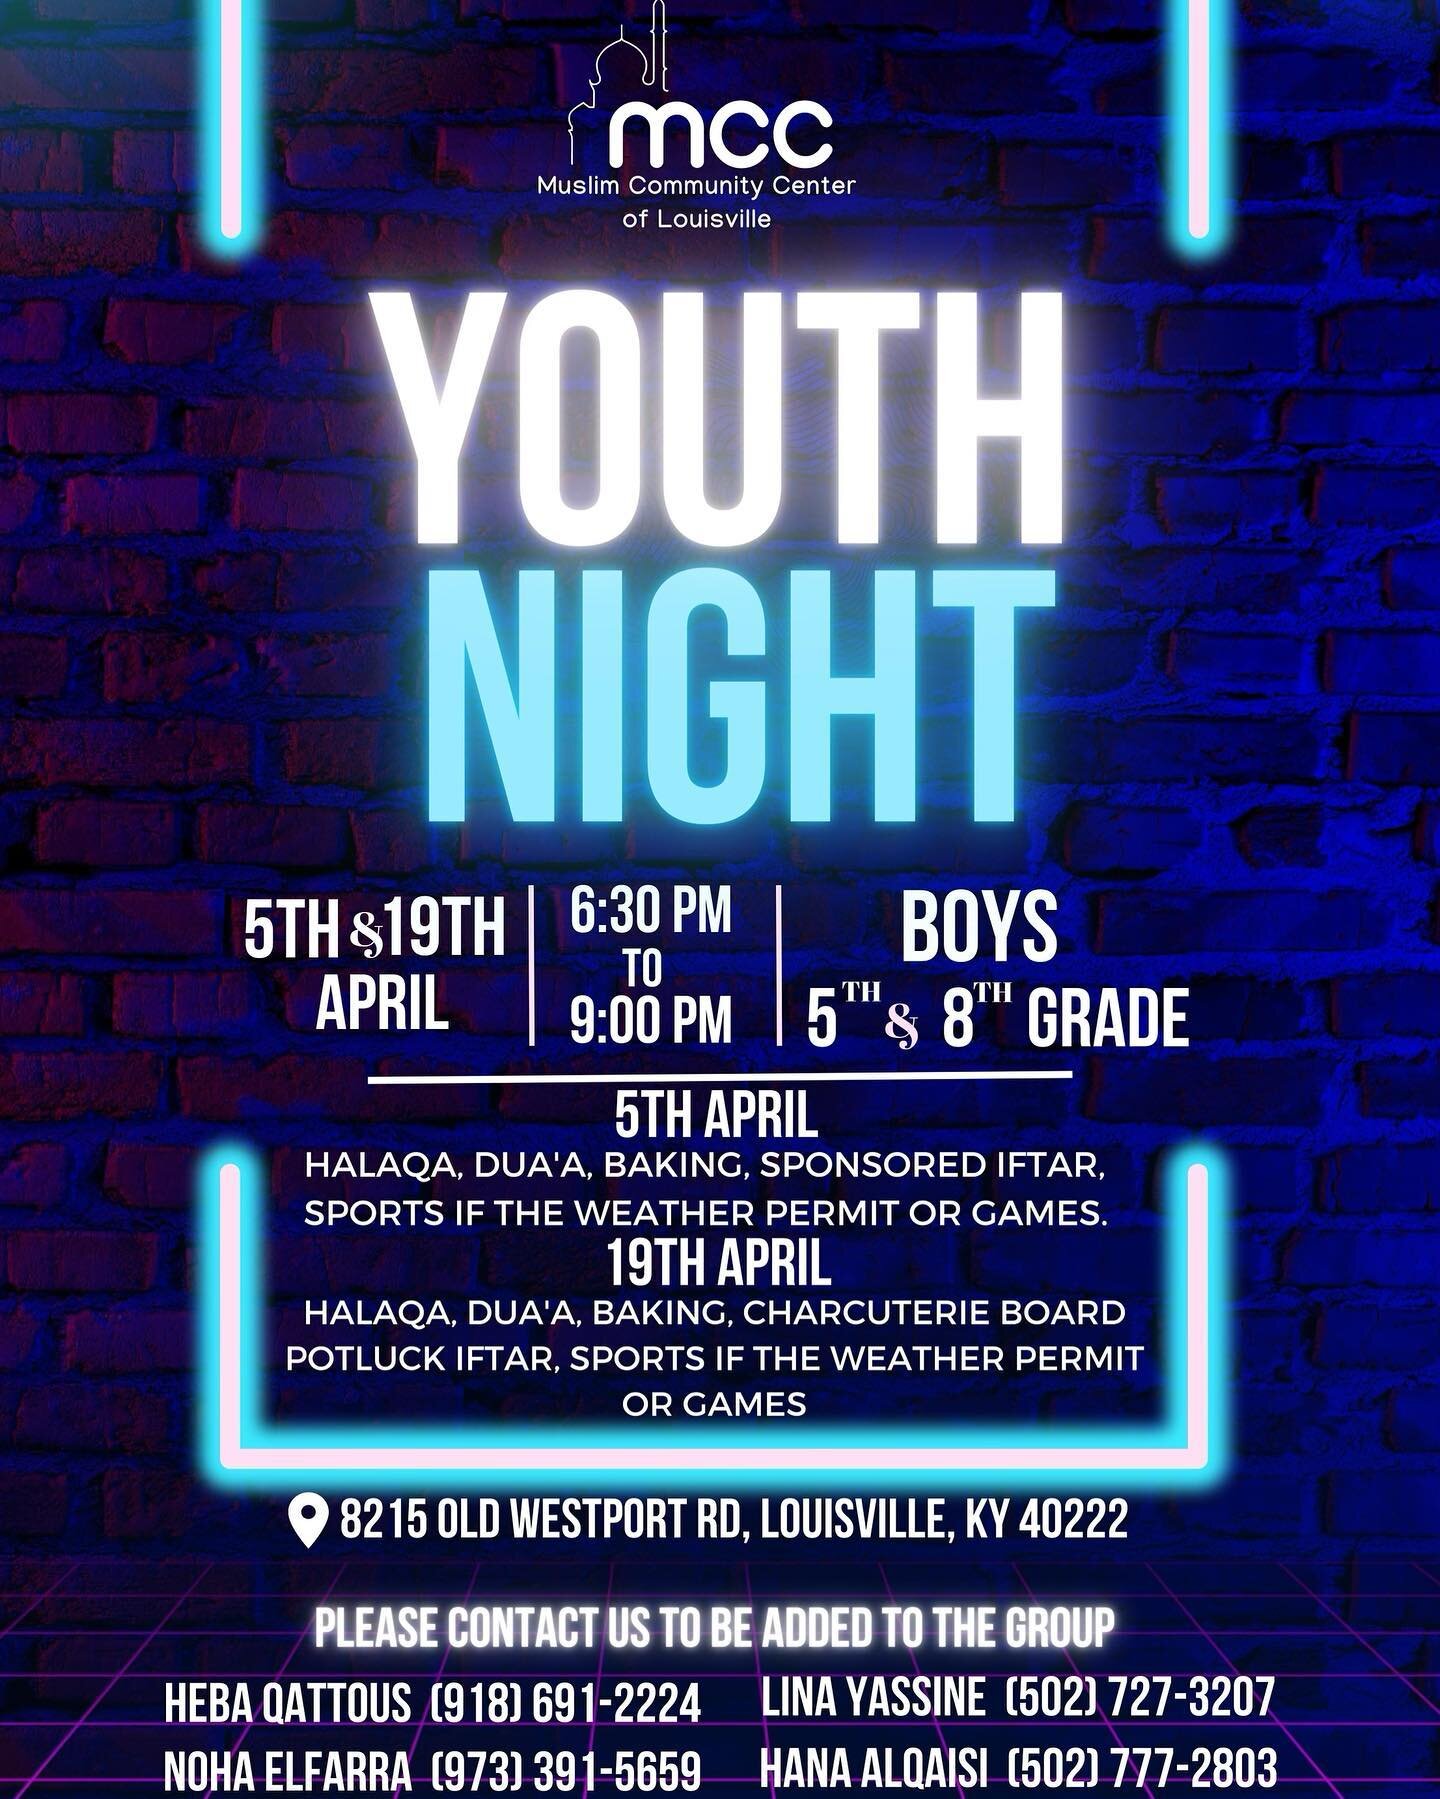 Another event planned for our youth Middle School Boys! 

The MCC (along with parent volunteers) is pleased to announce TWO events for middle schools boys (Grades 5-8) in the next few weeks! 

Both events are jam-packed, starting with a halaqah by a 